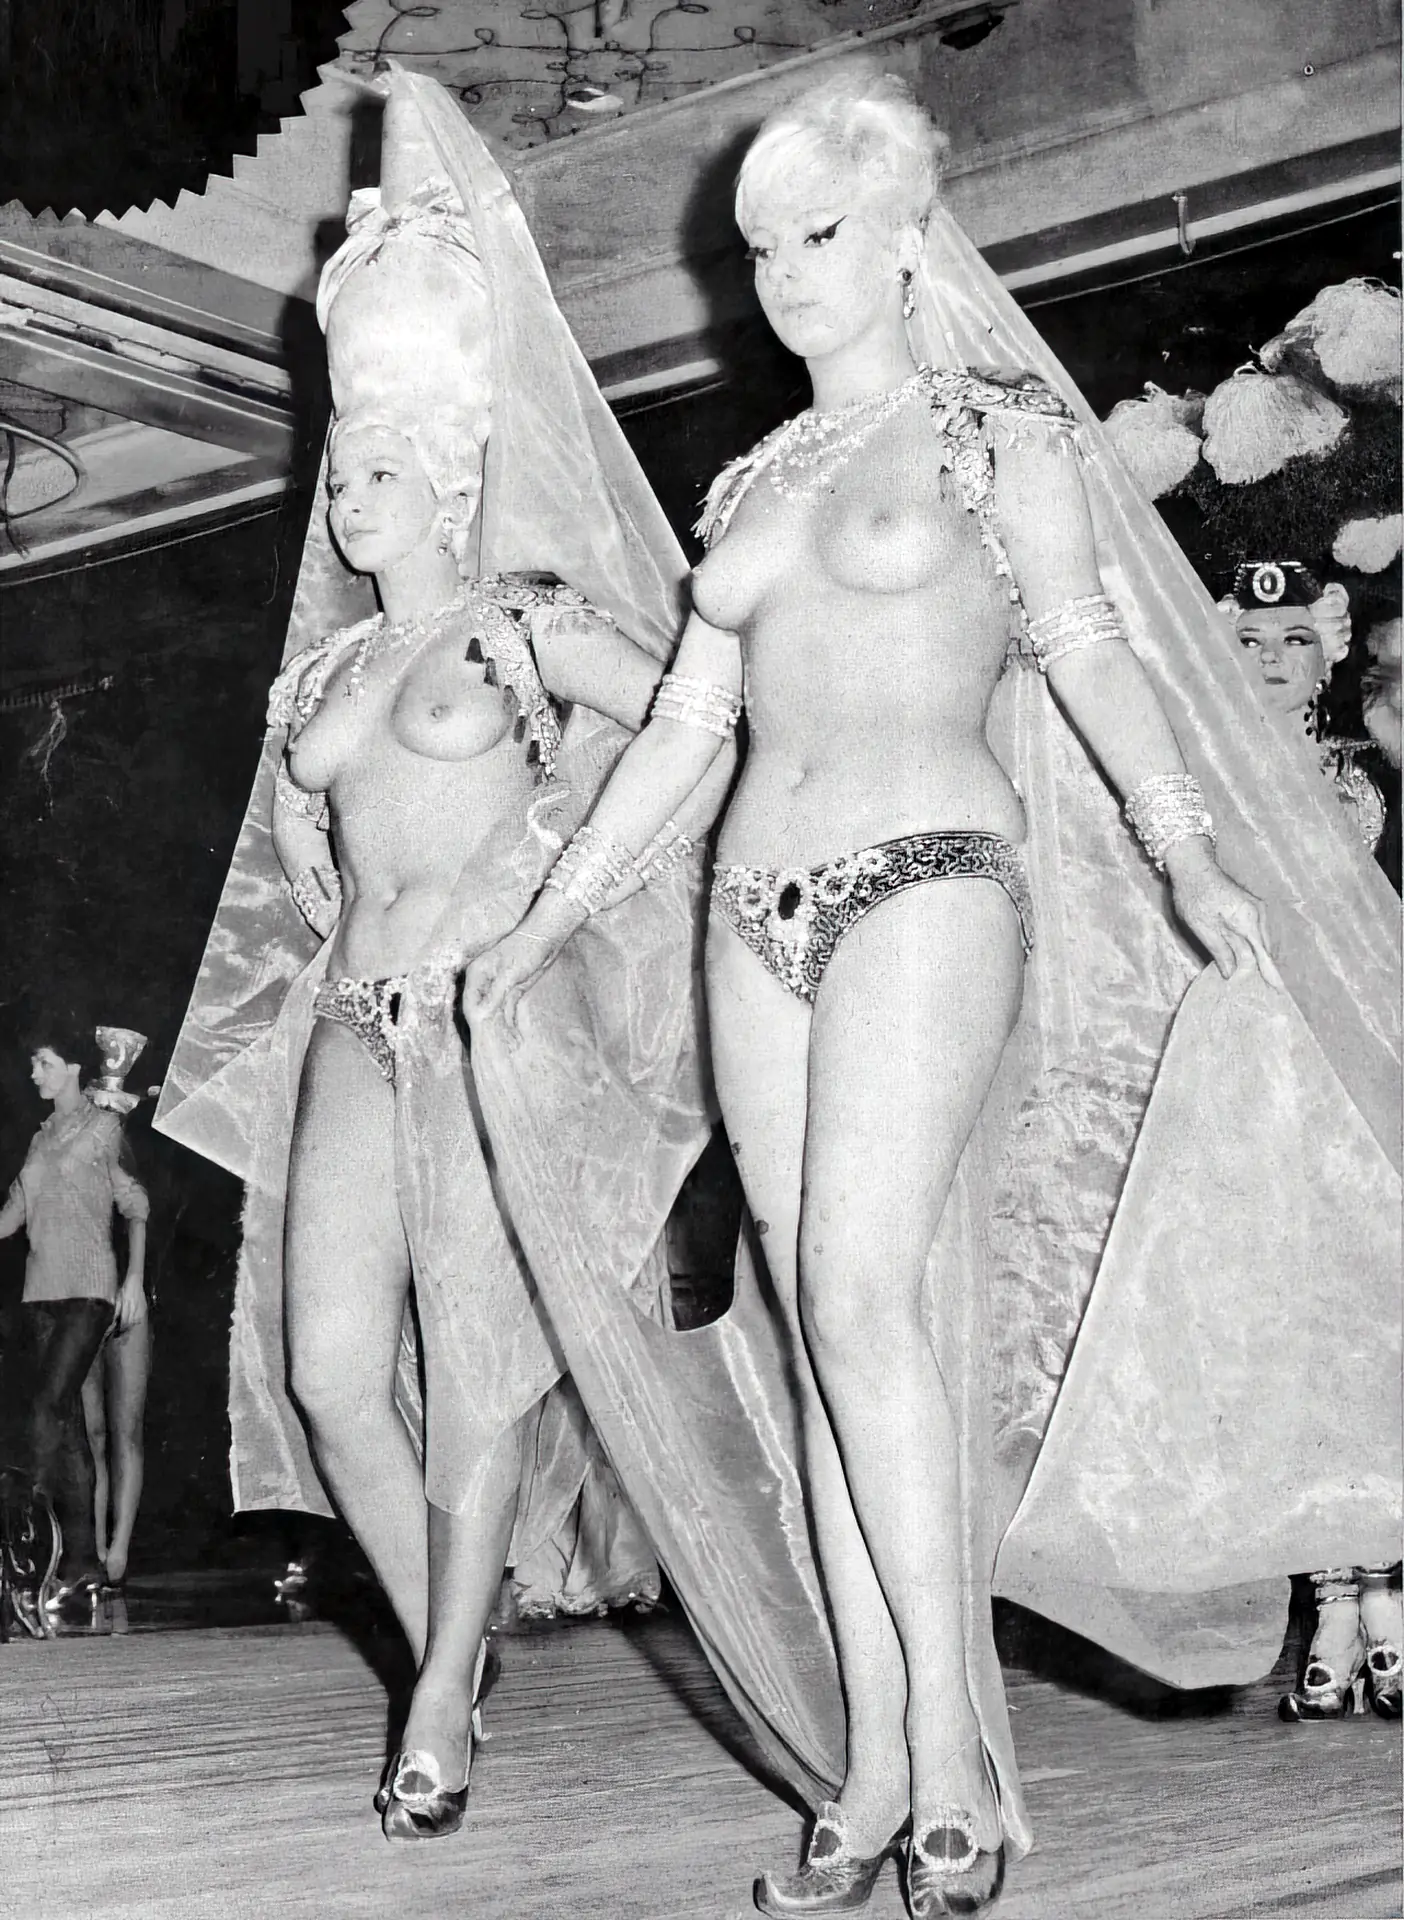 Extravagantly dressed topless vintage babes in a burlesque theatre